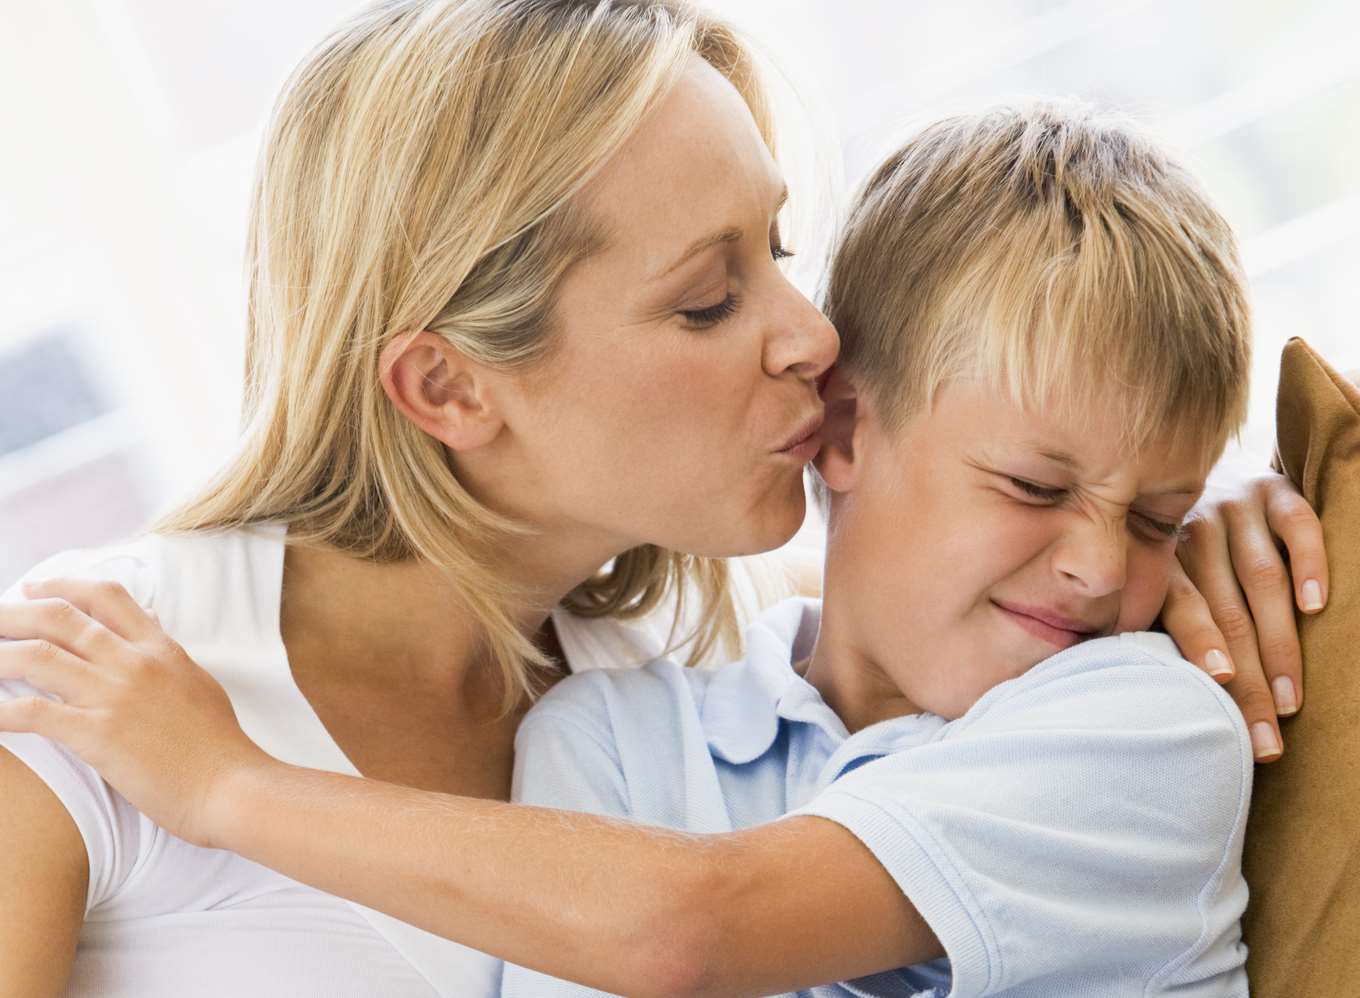 Kids just hate being kissed when you're out as a family